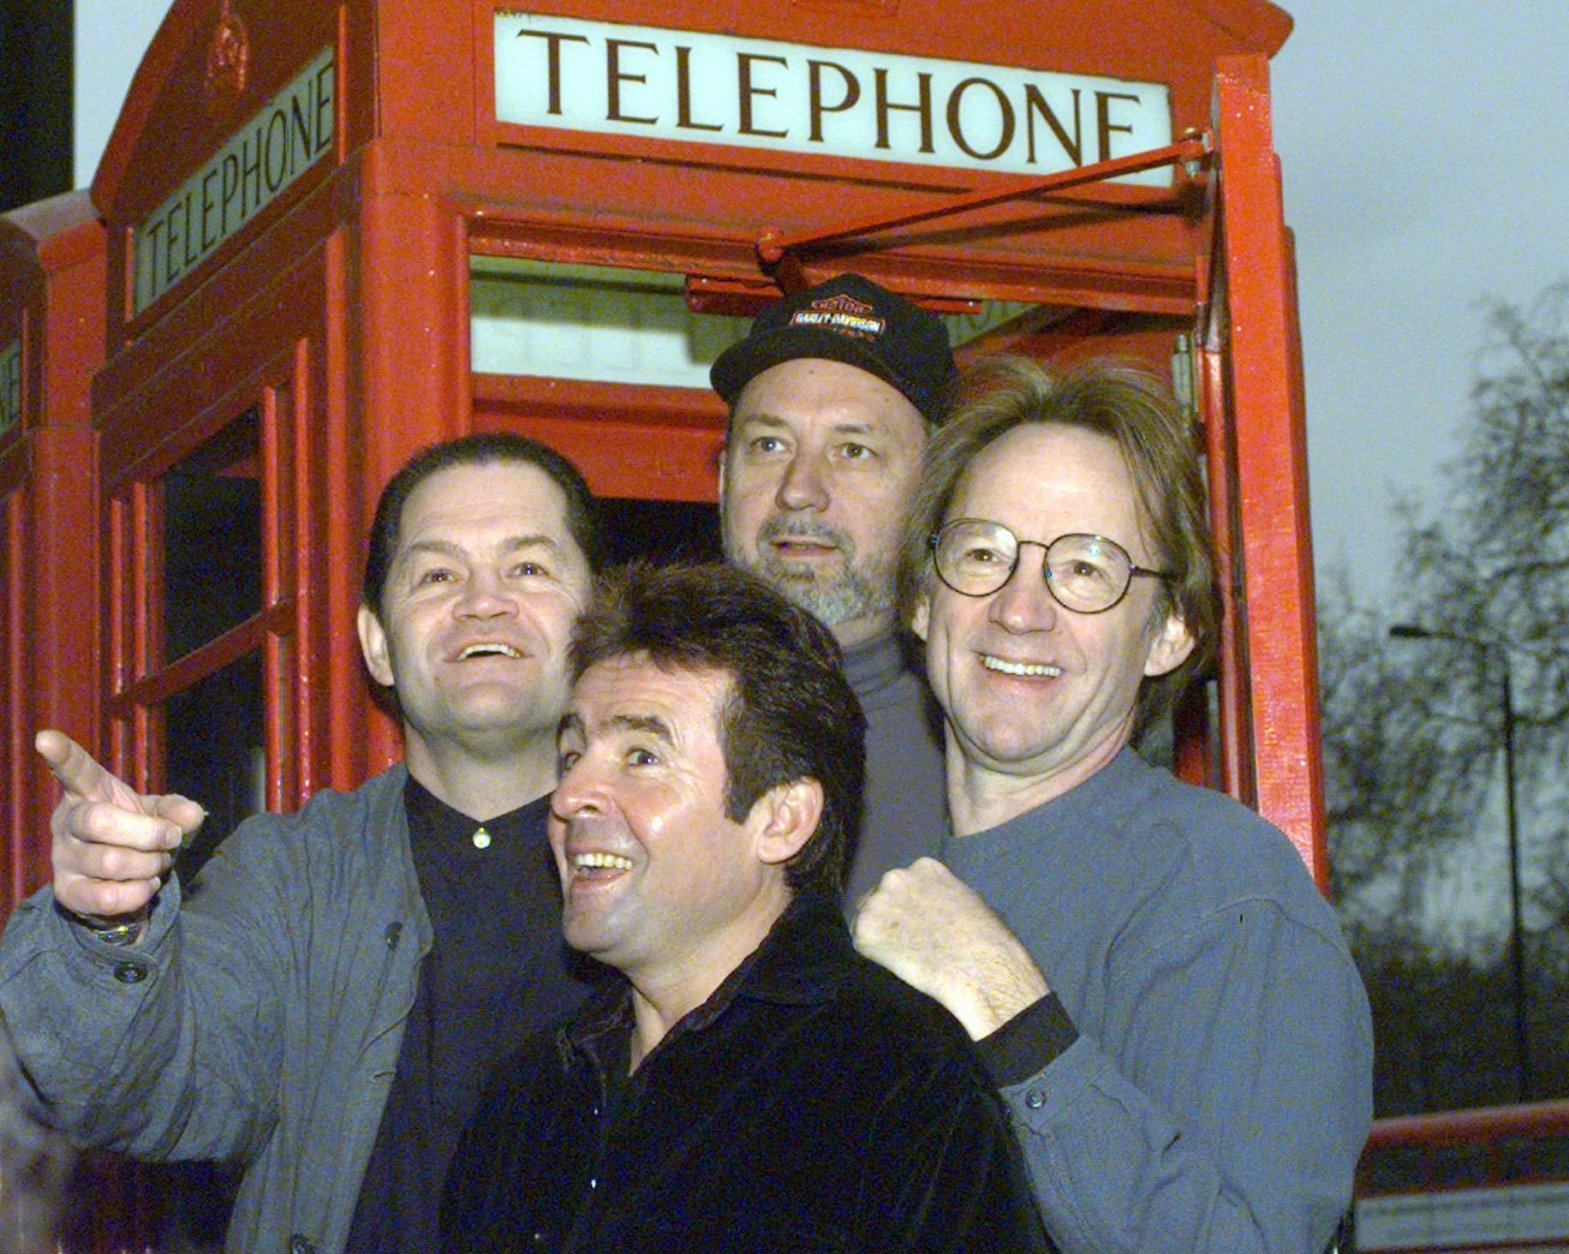 Members of the pop group The Monkees pose in front of a telephone booth in London  Friday, January 10, 1997 following a press conference at the Hard Rock Cafe where they announced plans for all four members of the group  to begin touring for the first time in 30 years.  From left to right are Mickey Dolenz, Davy Jones, Mike Nesmith and Peter Tork.  (AP Photo/Lynne Sladky)